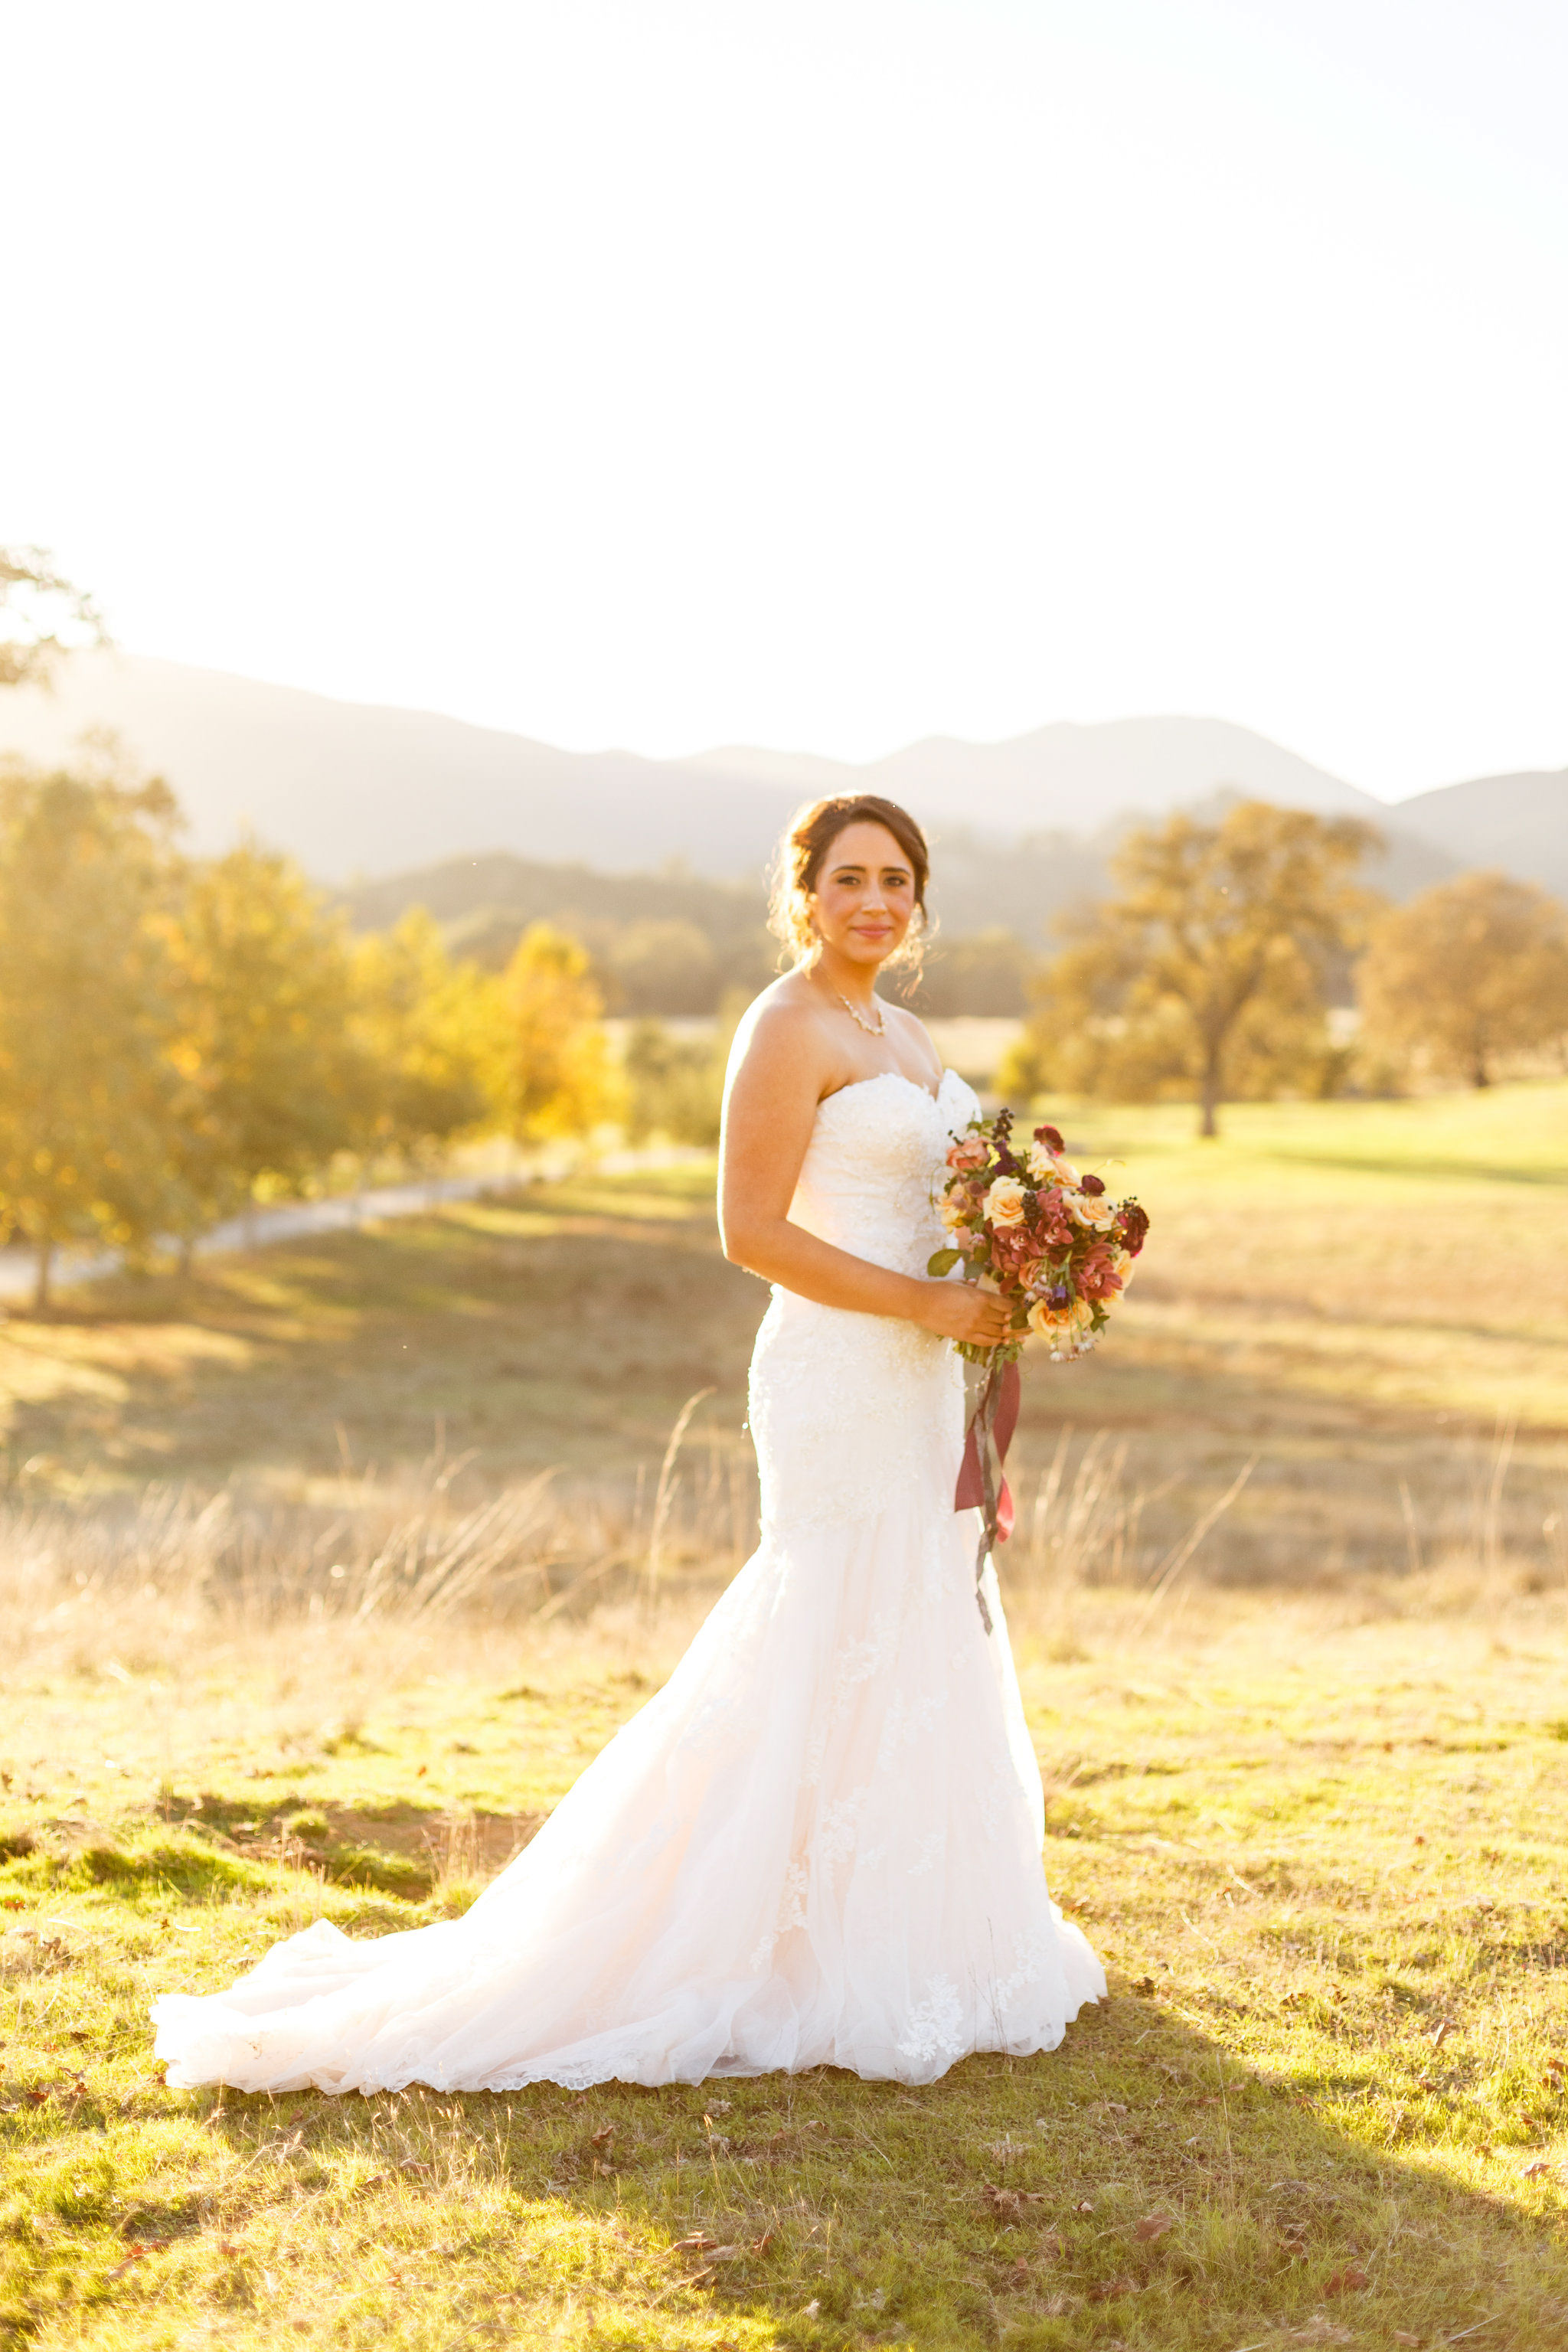 Bridal portraits during sunset after wedding at Spanish Oaks Ranch